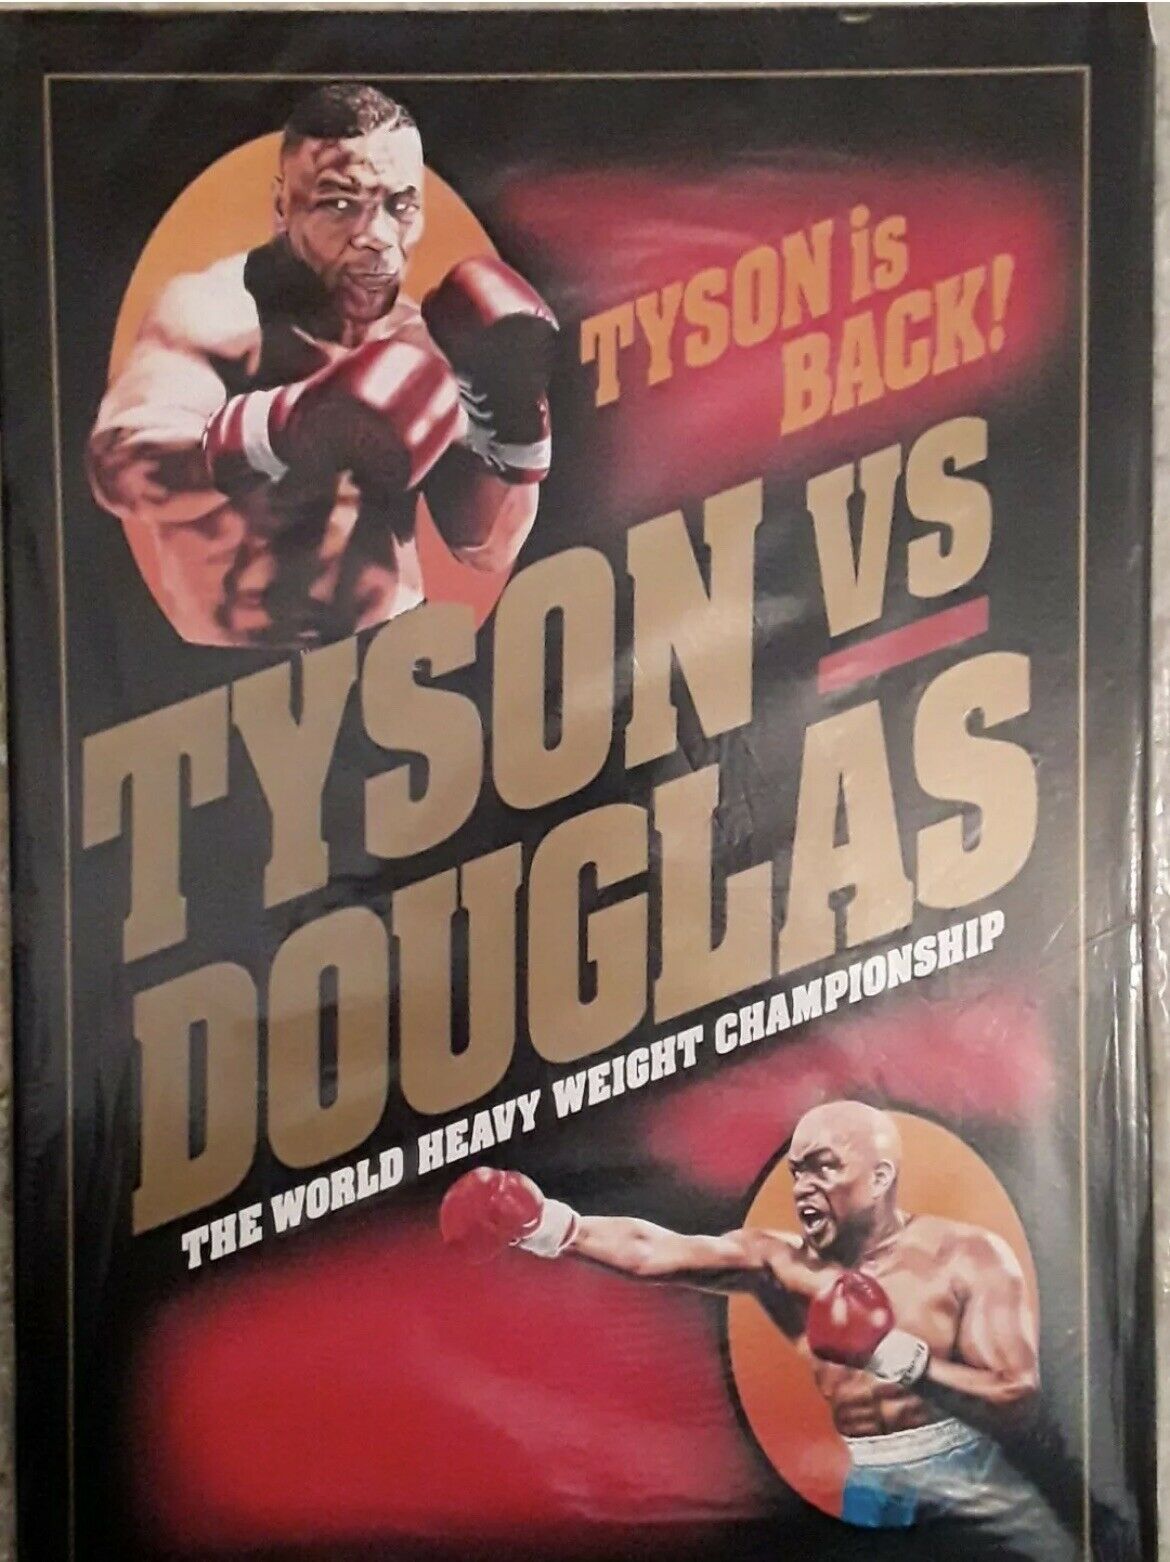 Buster Douglas wants to fight Mike Tyson again 30 years after 1990 KO